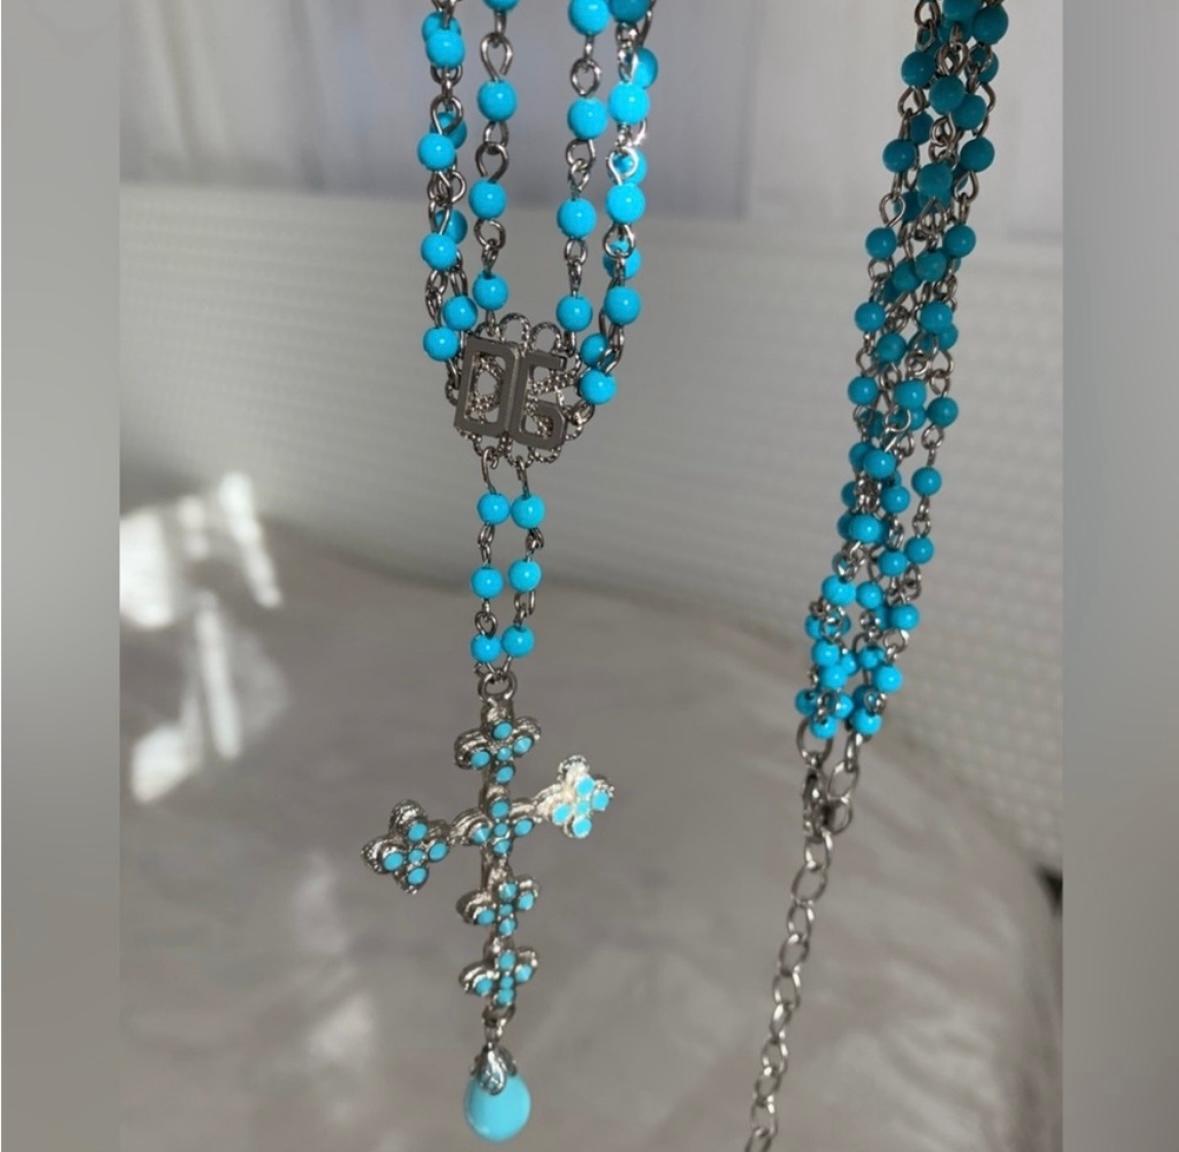  Dolce Gabbana 2000’s turquoise cross pendant necklace 

Good vintage condition, comes with original box